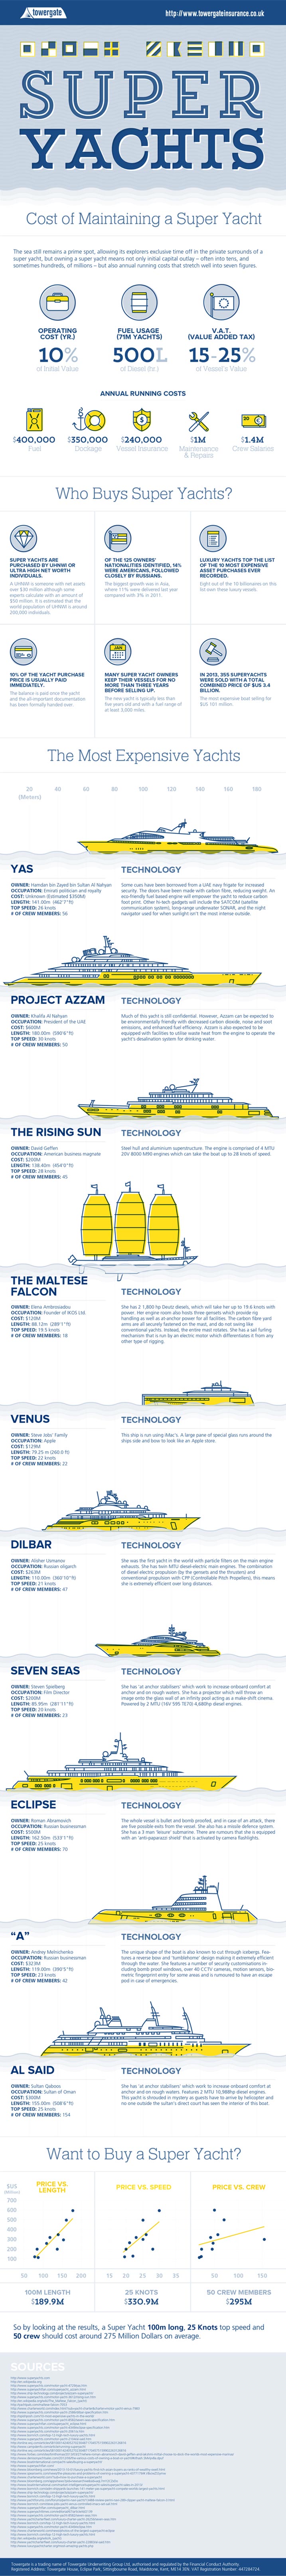 Superyacht Infographic FINAL